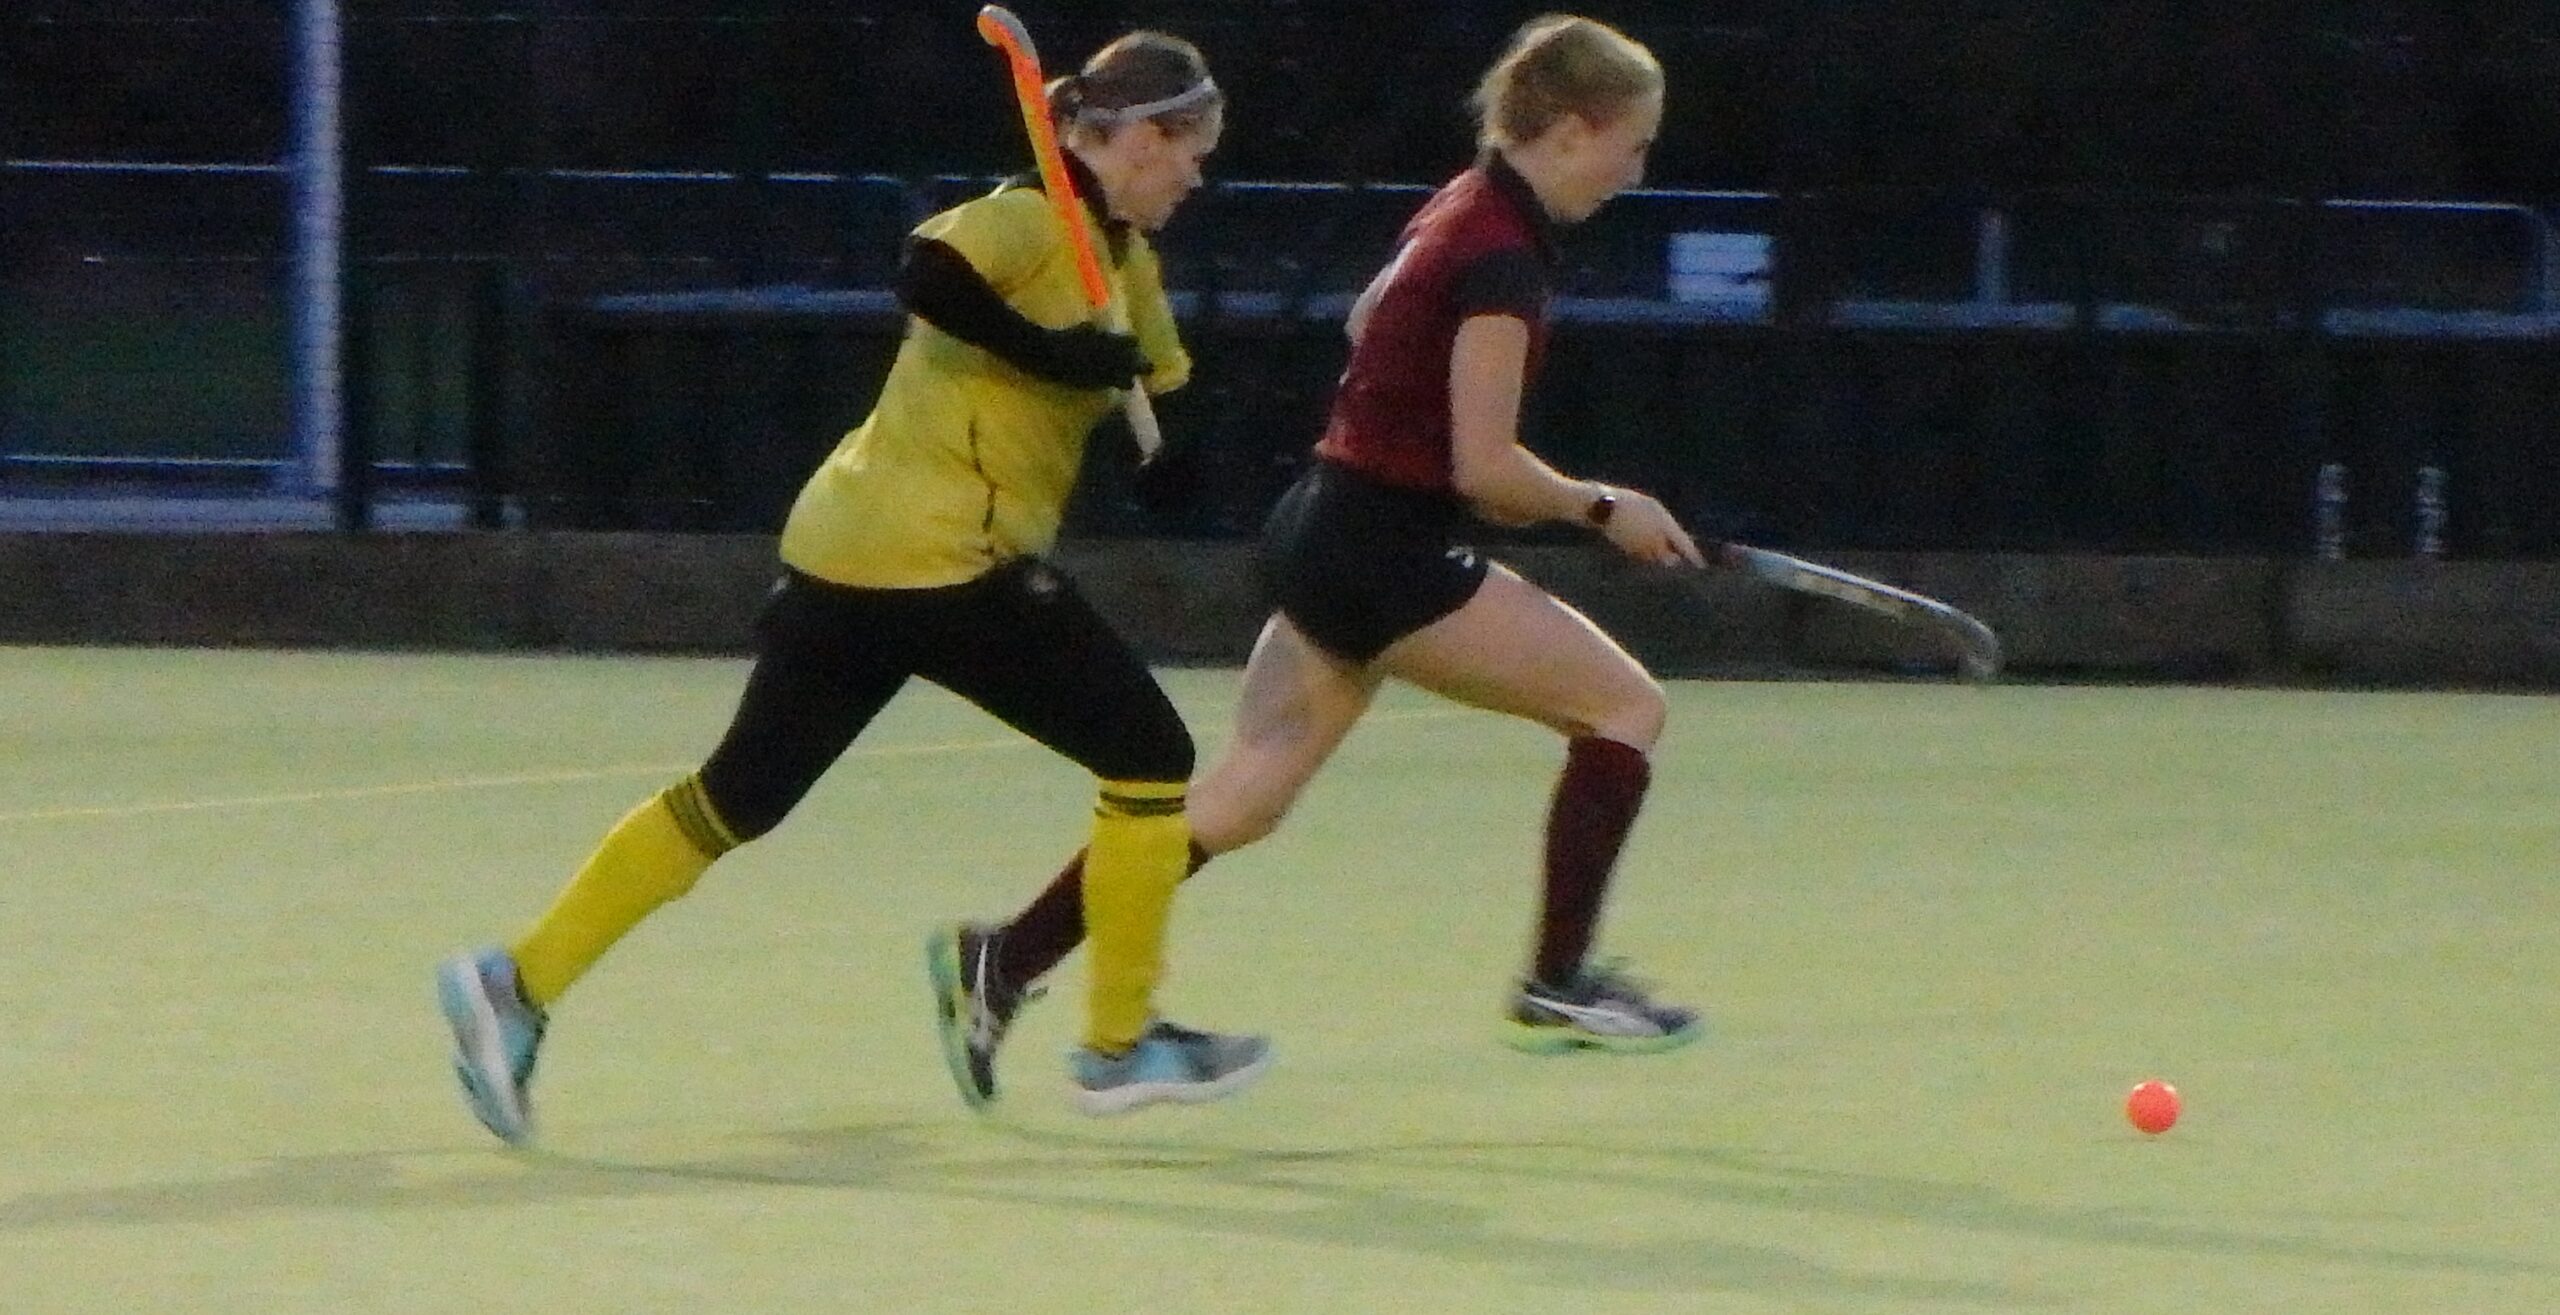 Ladies’ 8s in great win at Leighton...